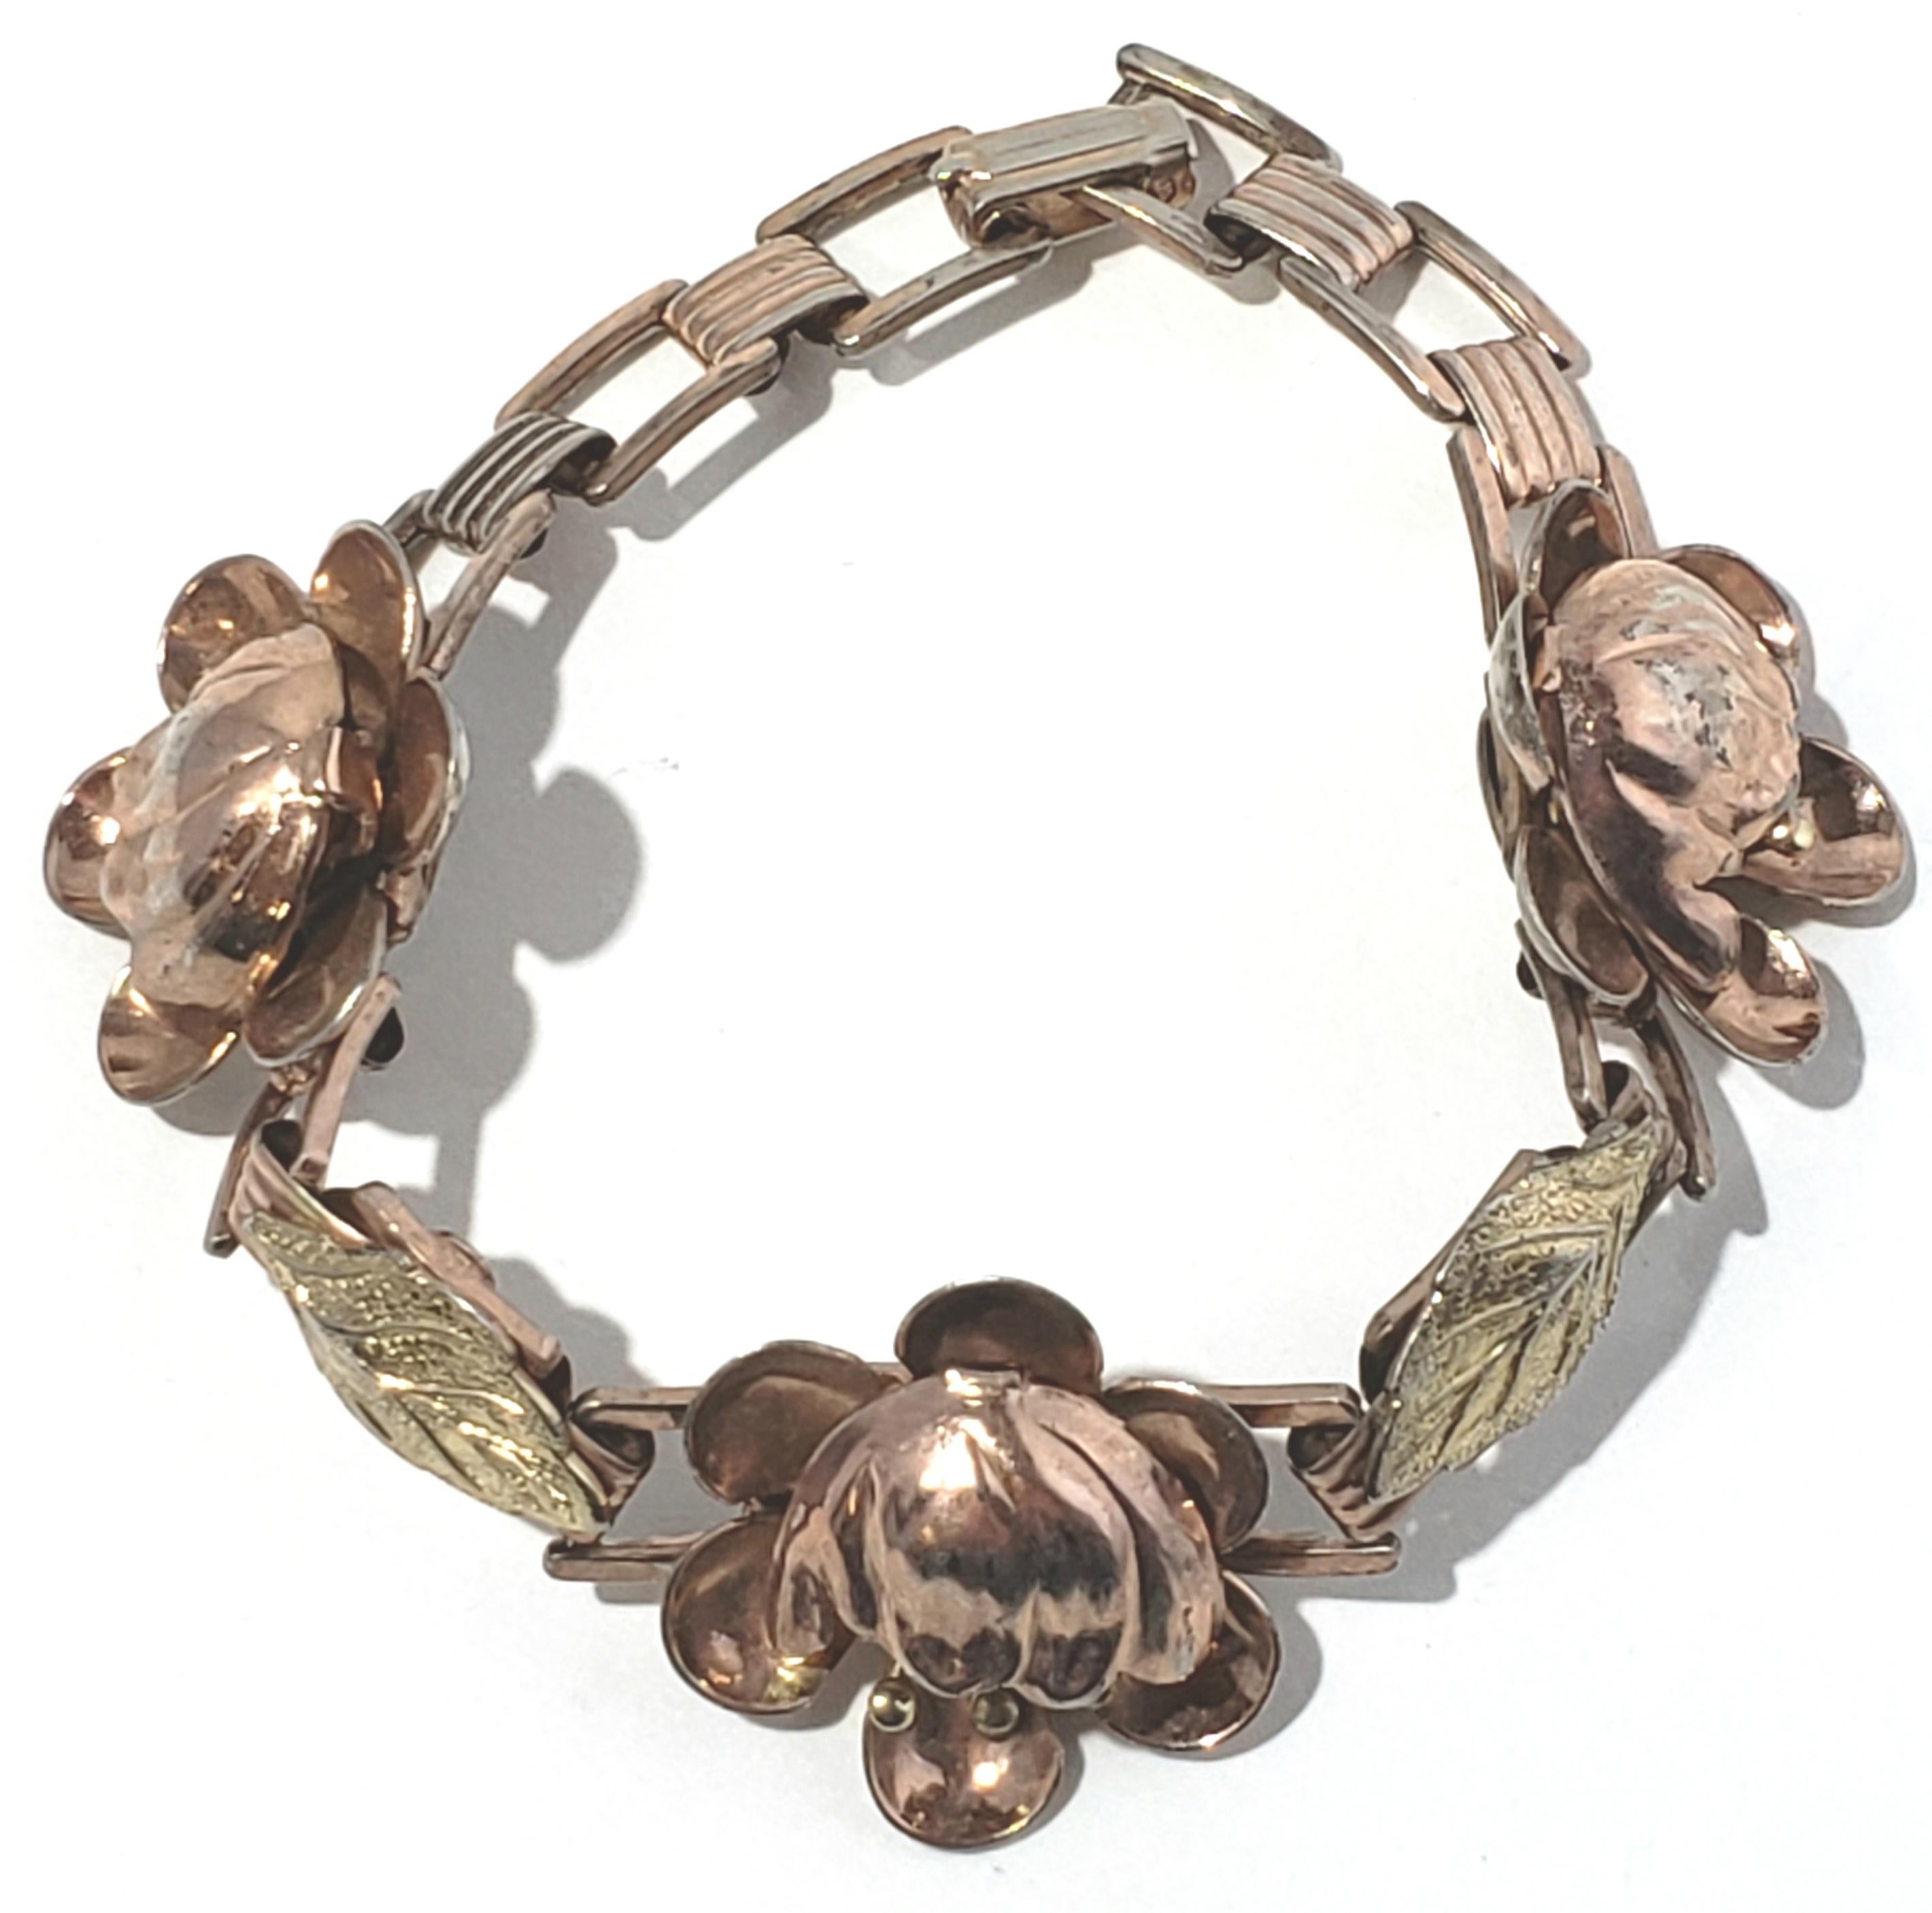 Sterling Silver Vermeil Flower Link Bracelet

This is a lovely Sterling Silver Vermeil Flower Link Bracelet. 

Measurements:  Bracelet measures 7 3/4 inches.  Width is 7/8 inches. 

Weight:  21.0 g / 13.5 dwt  

Condition: In good condition with